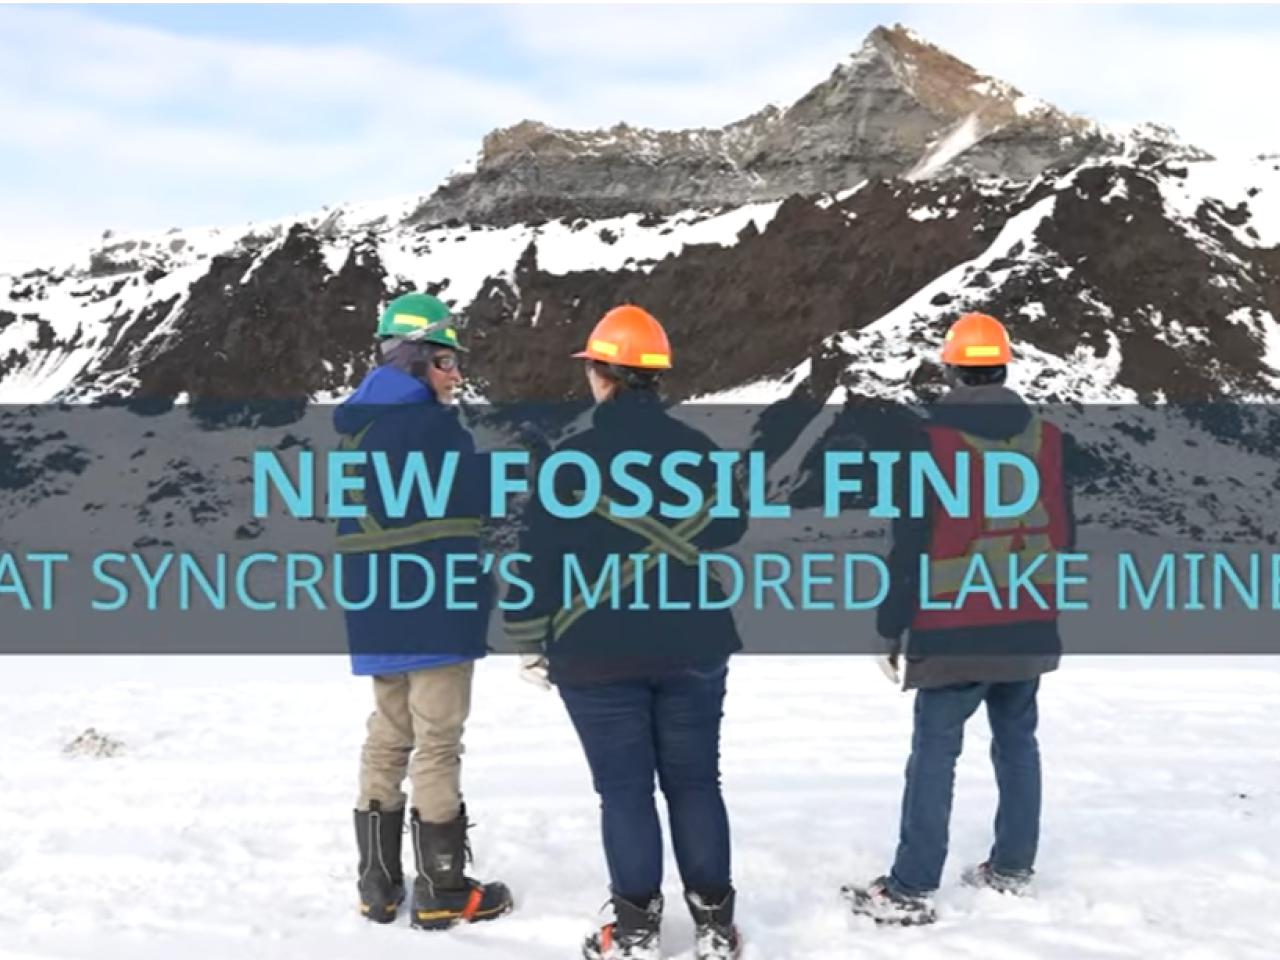 People standing in front of mountain with text "New Fossil Find at Syncrude's Mildred Lake Mine"